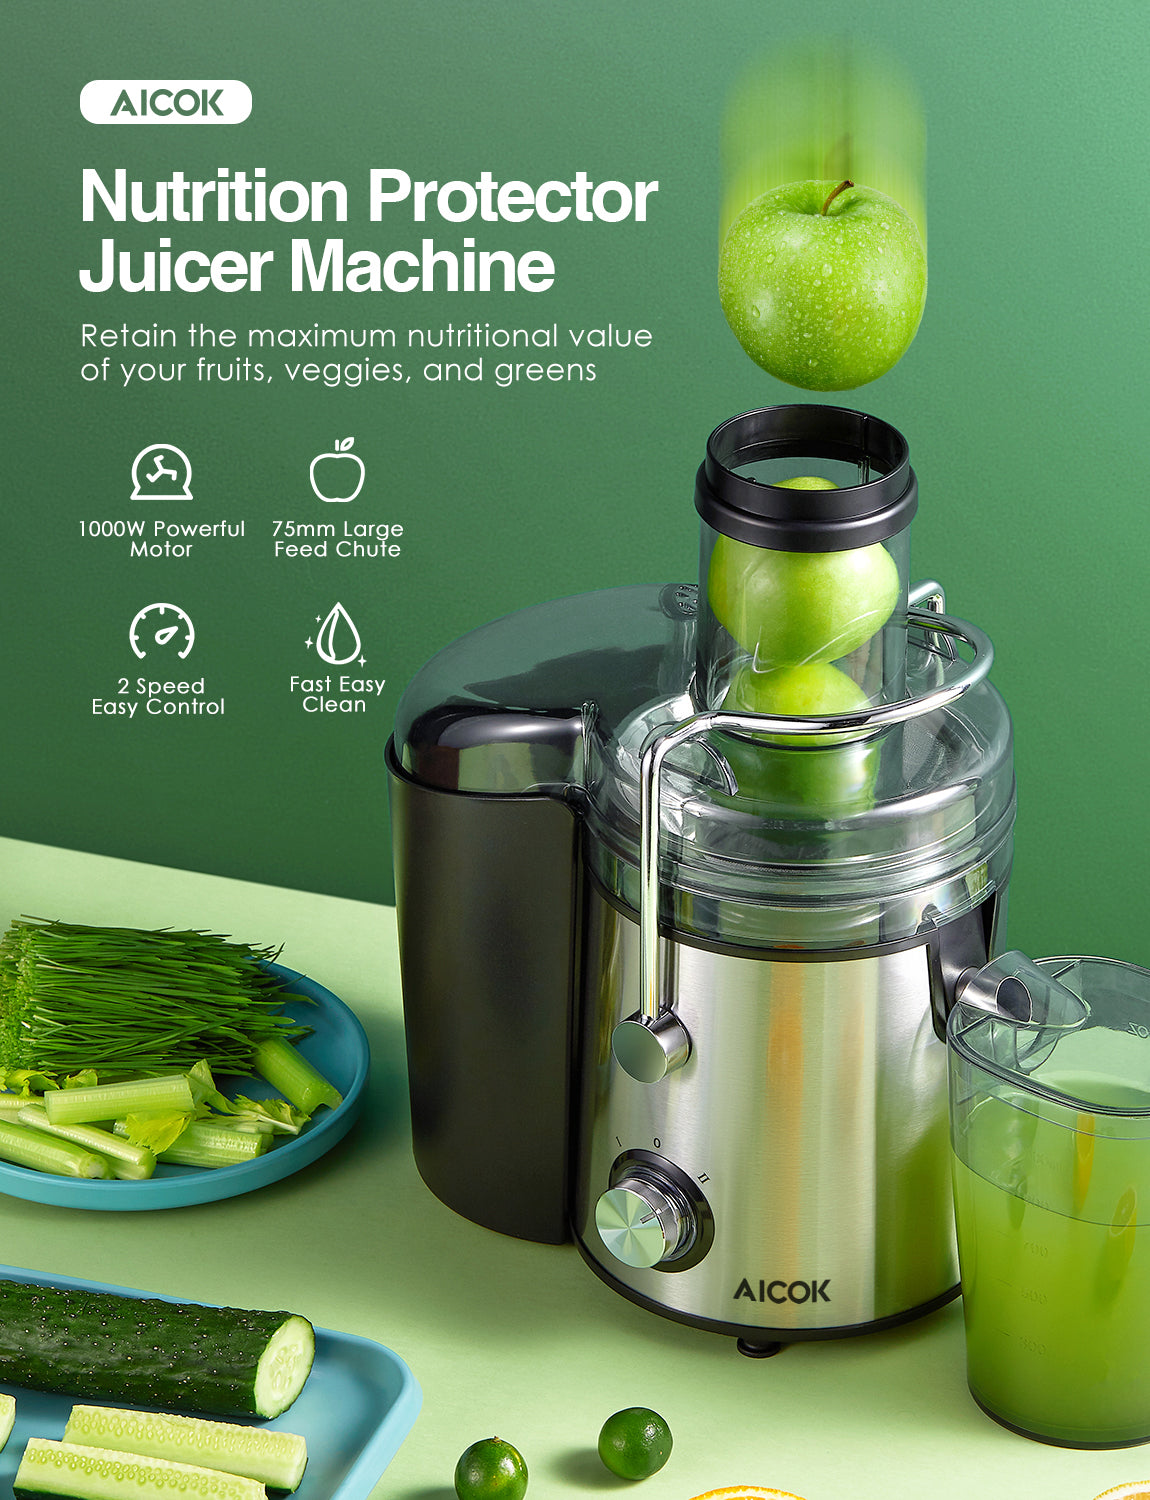 AICOK-Juicer, 1000W Stainless Steel Juicer Machines GS-332 nutrition protector large feed chute juicer